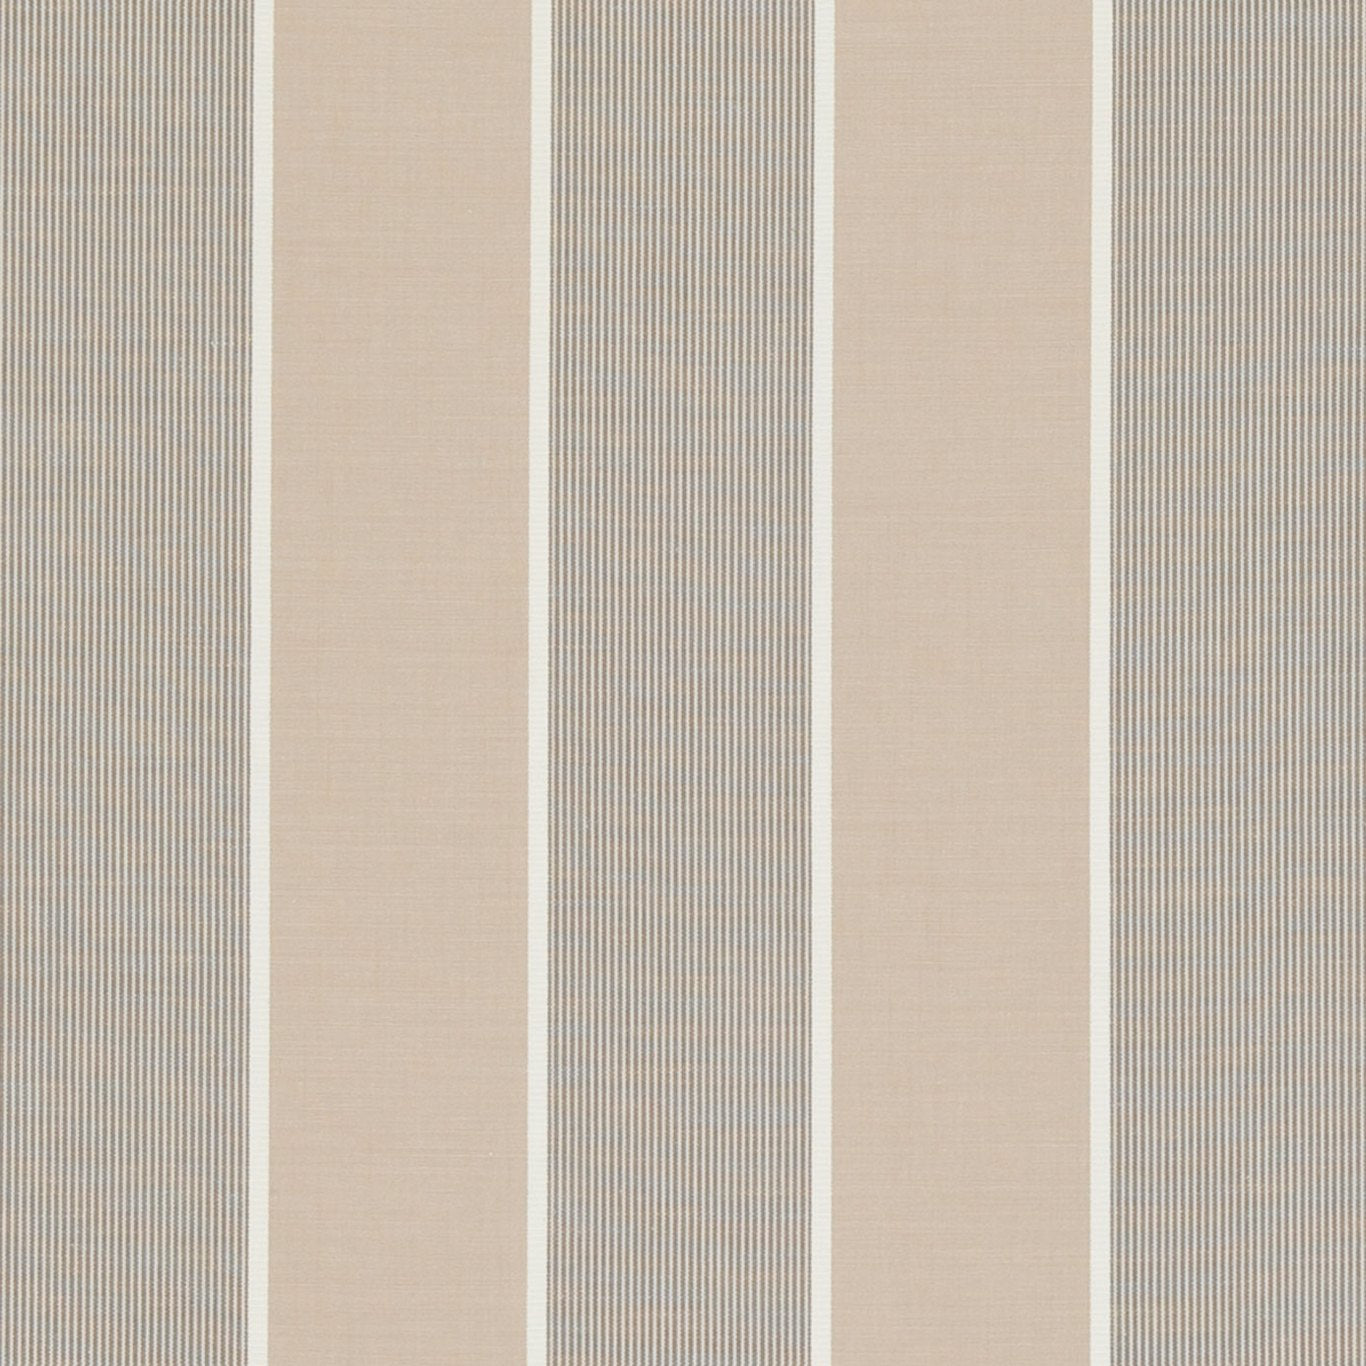 Chatburn Fabric by Clarke & Clarke - F0597/04 - Natural